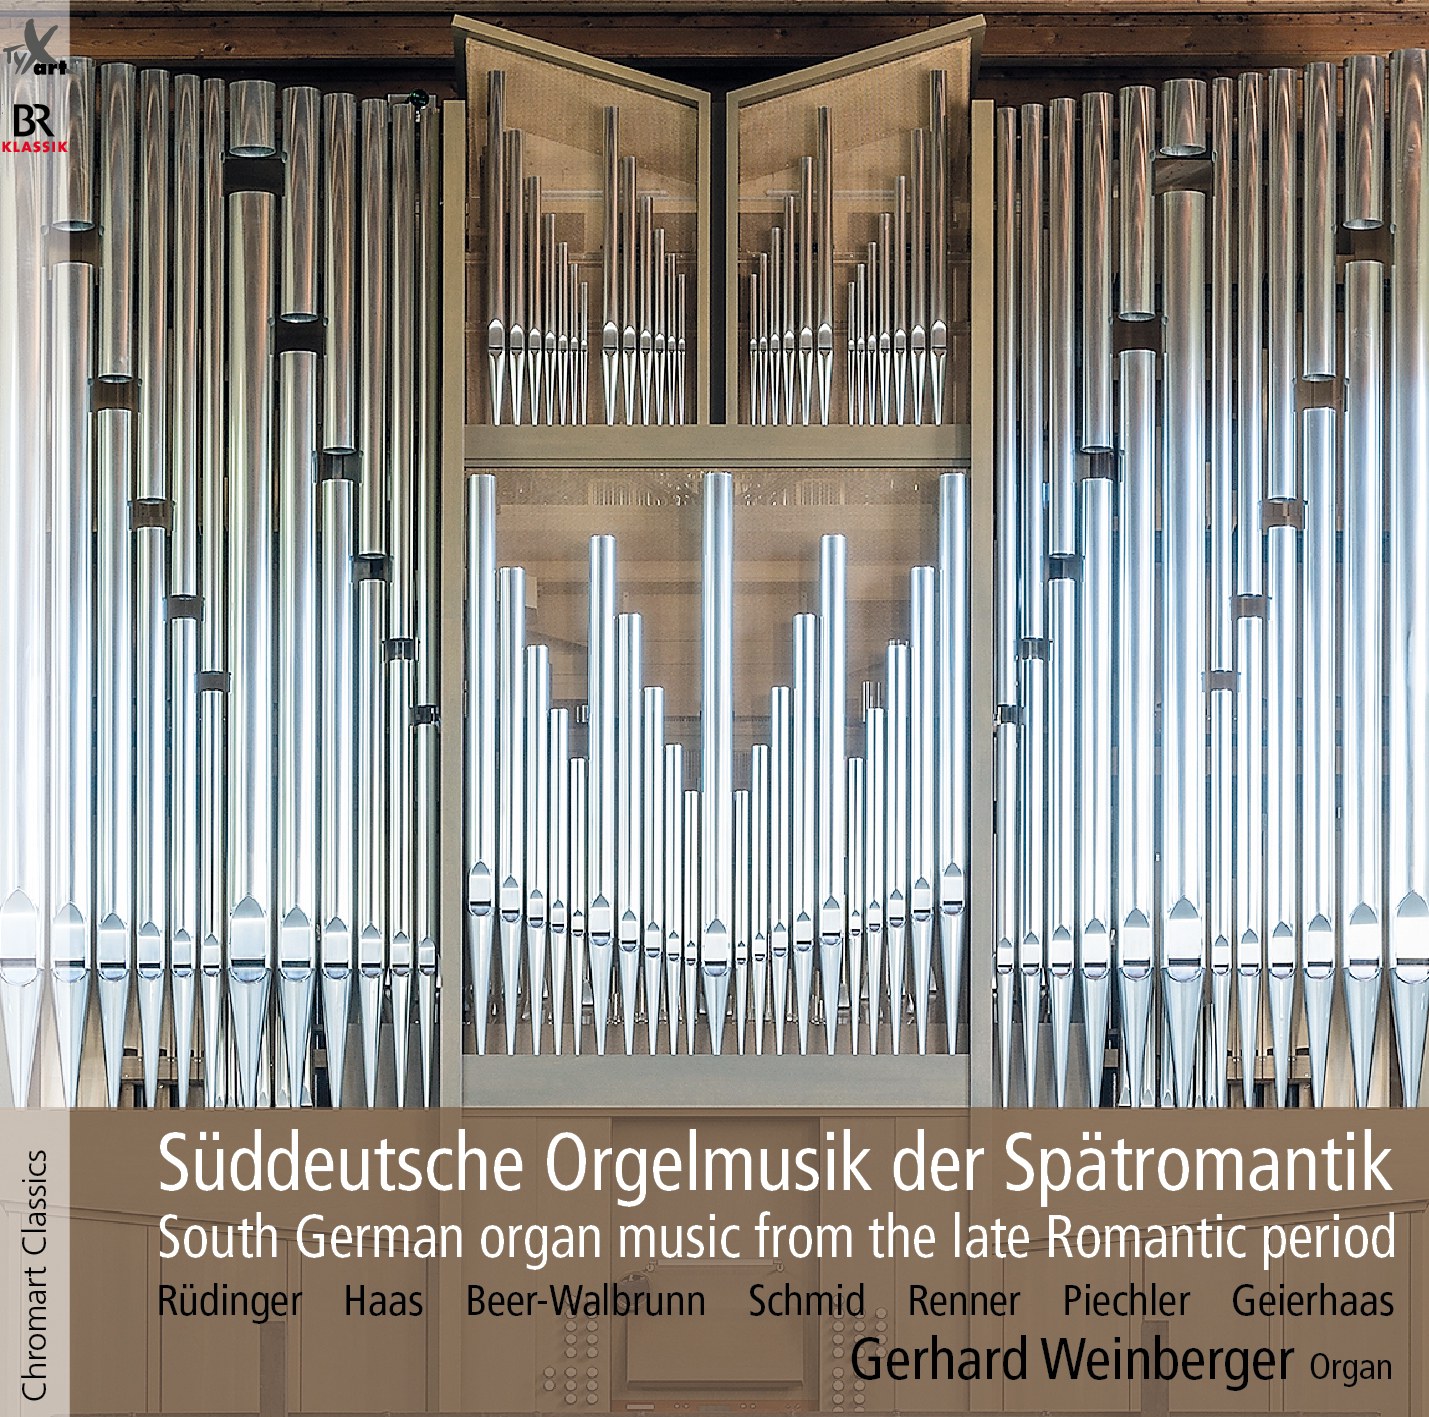 South German organ music from the late Romantic period - Gerhard Weinberger, organ